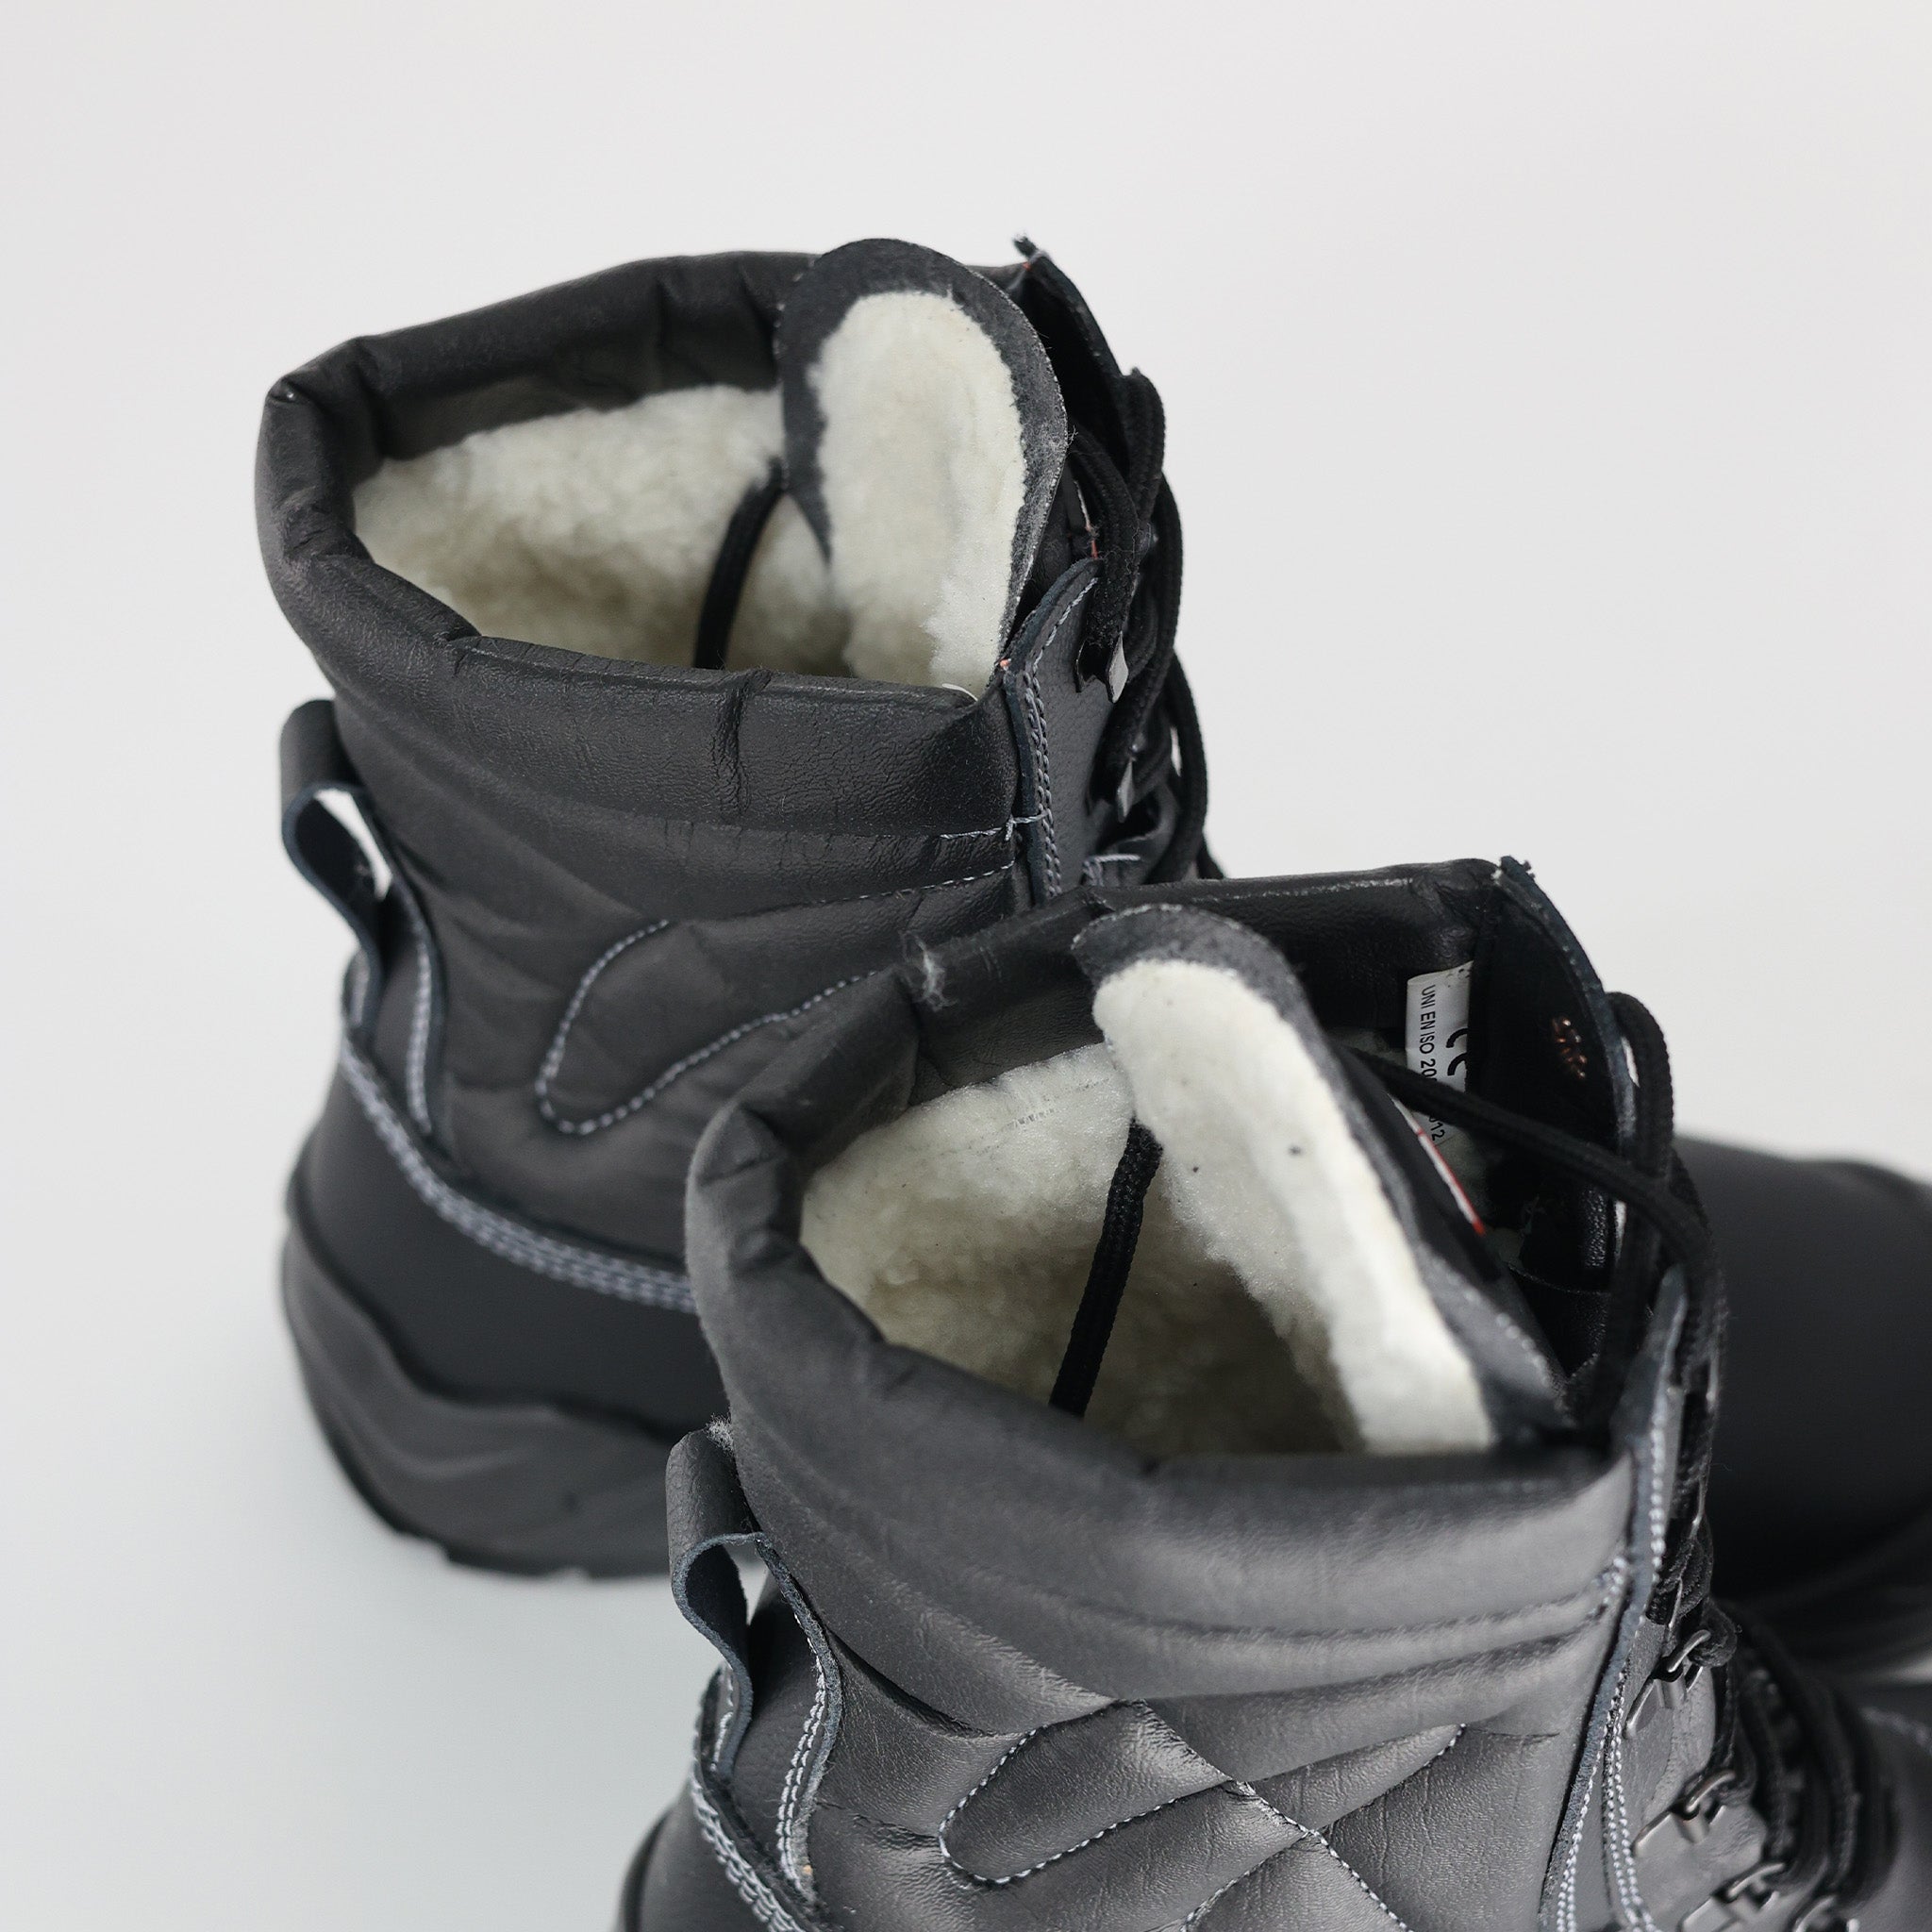 Epik Alaska Safety Boot - Insulated Freezer Boot for Cold Storage ...